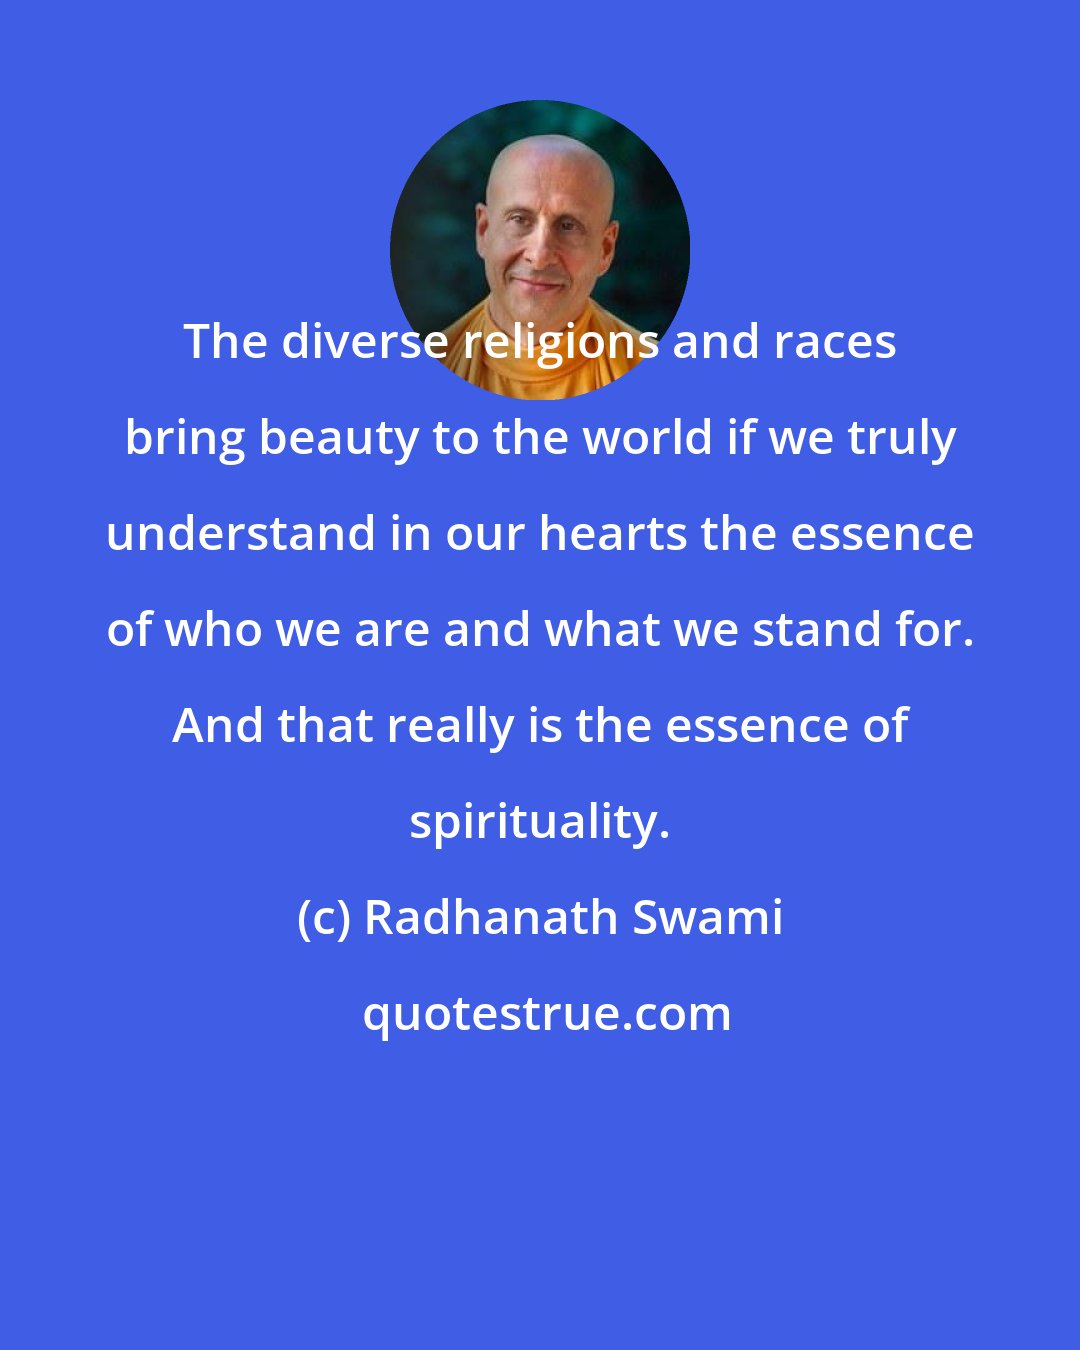 Radhanath Swami: The diverse religions and races bring beauty to the world if we truly understand in our hearts the essence of who we are and what we stand for. And that really is the essence of spirituality.